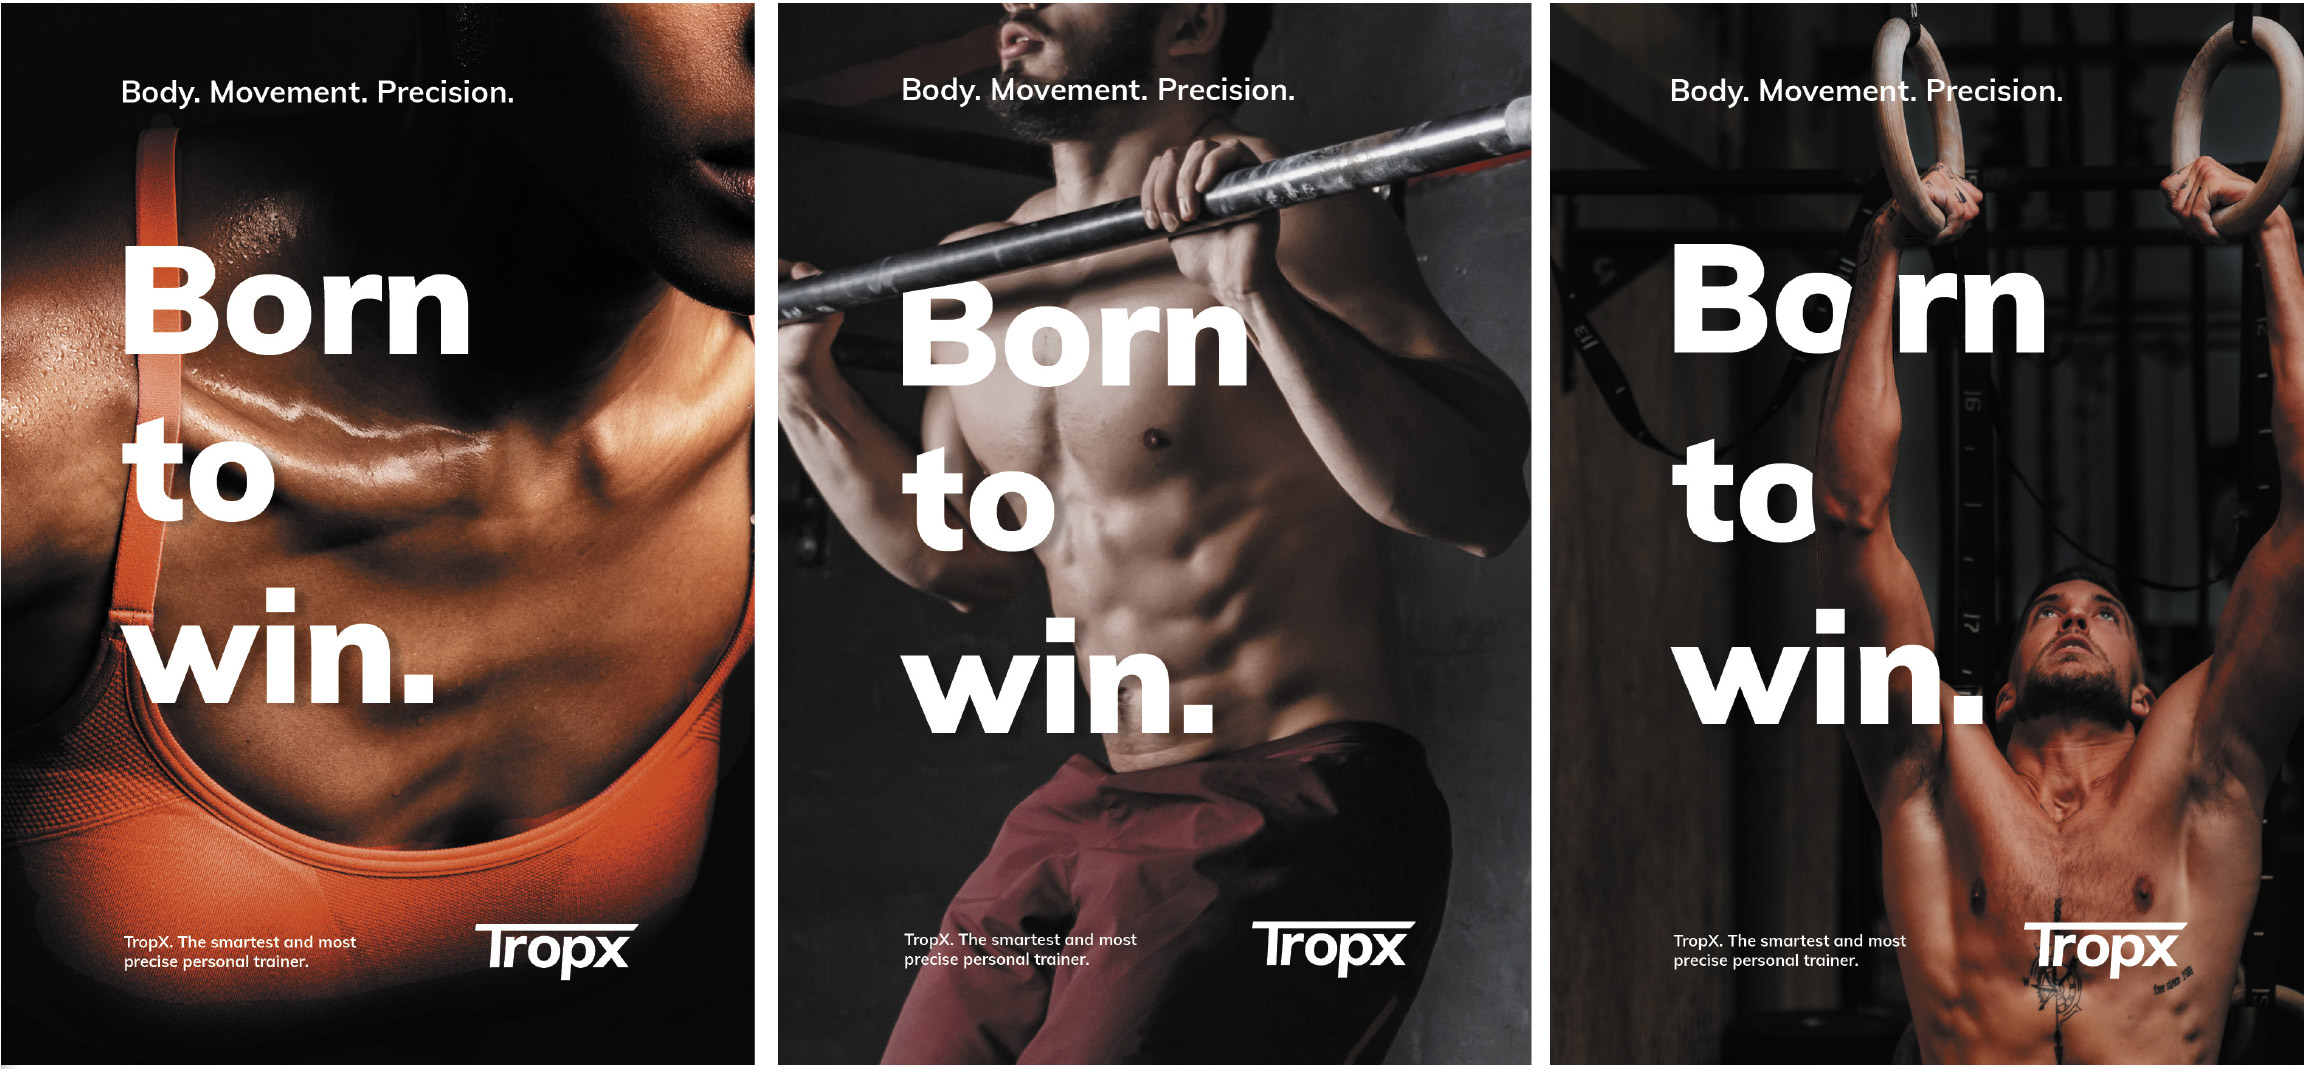 NotFromHere Brand Agency logo design Tropx creative posters design for fitness